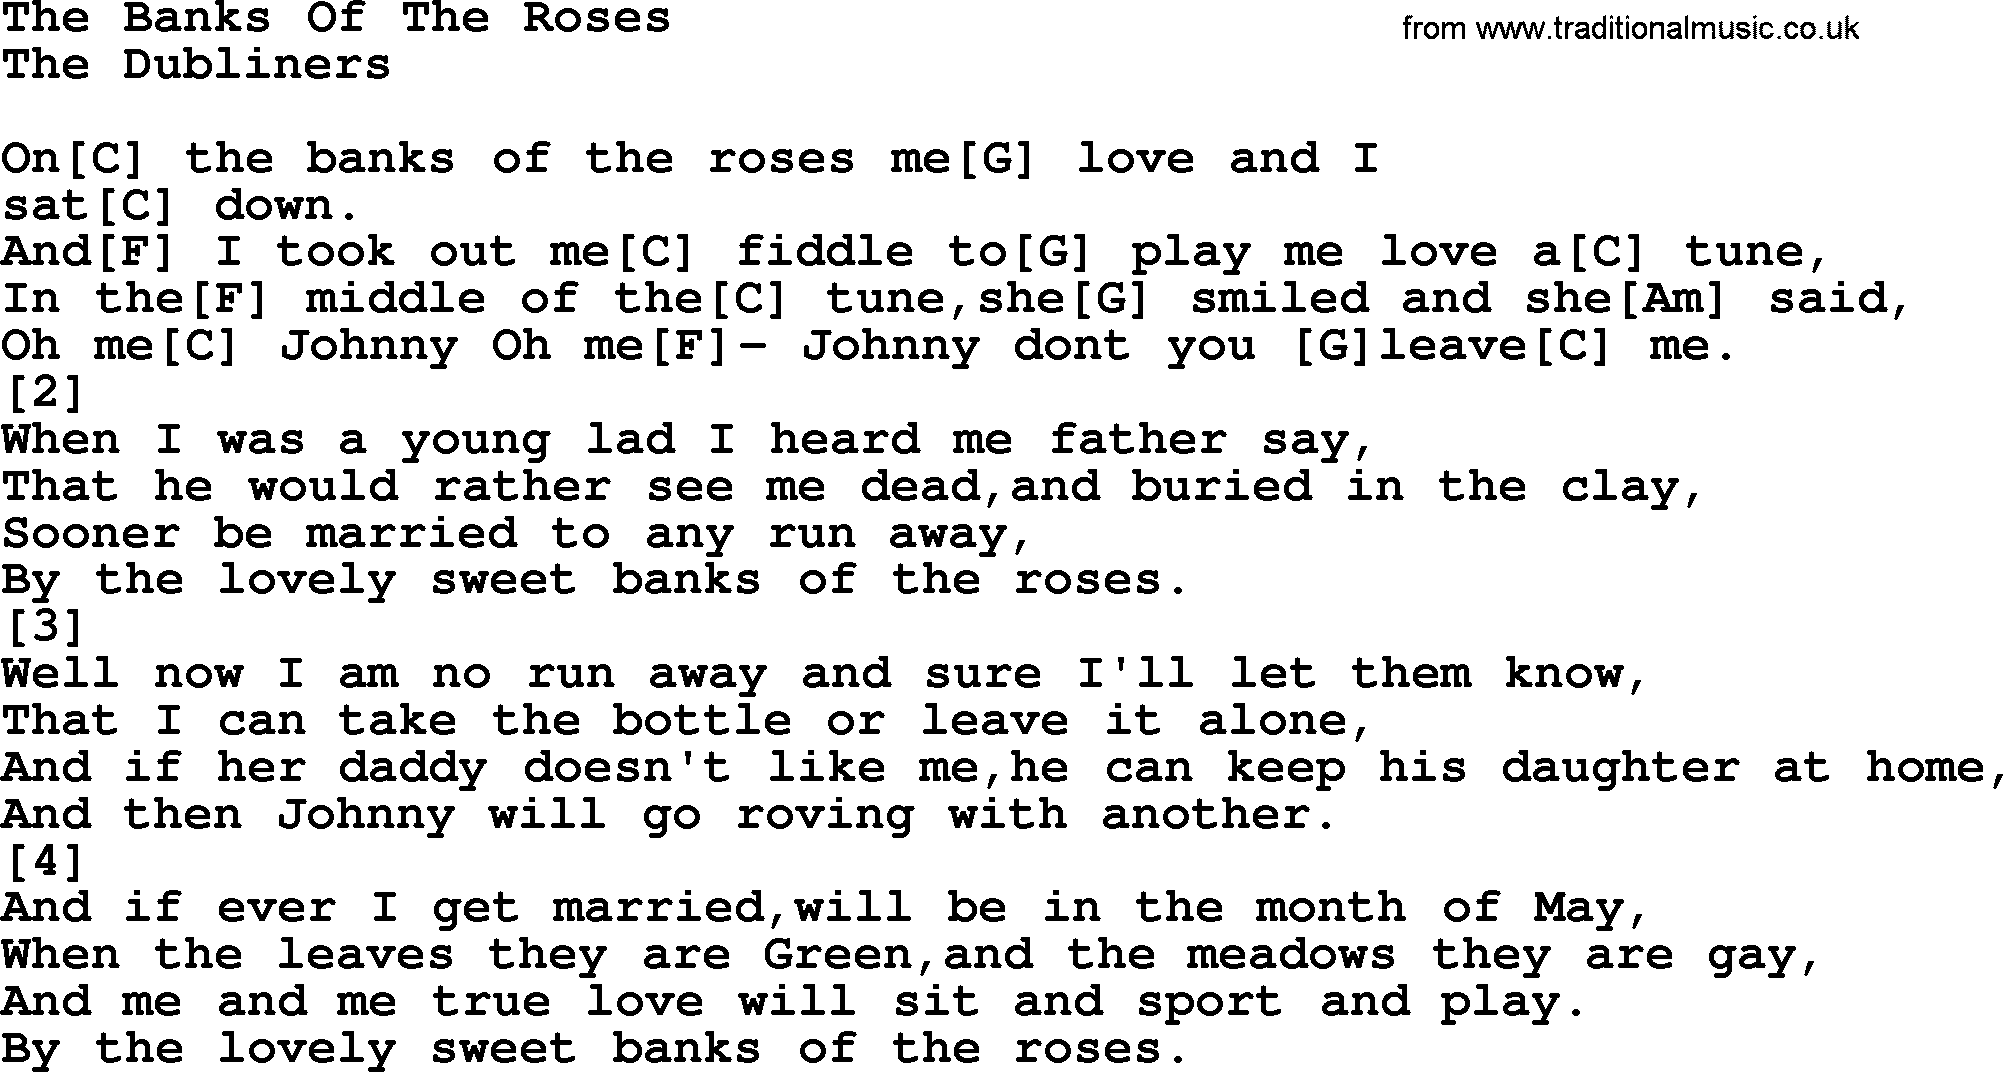 The Dubliners song: The Banks Of The Roses, lyrics and chords